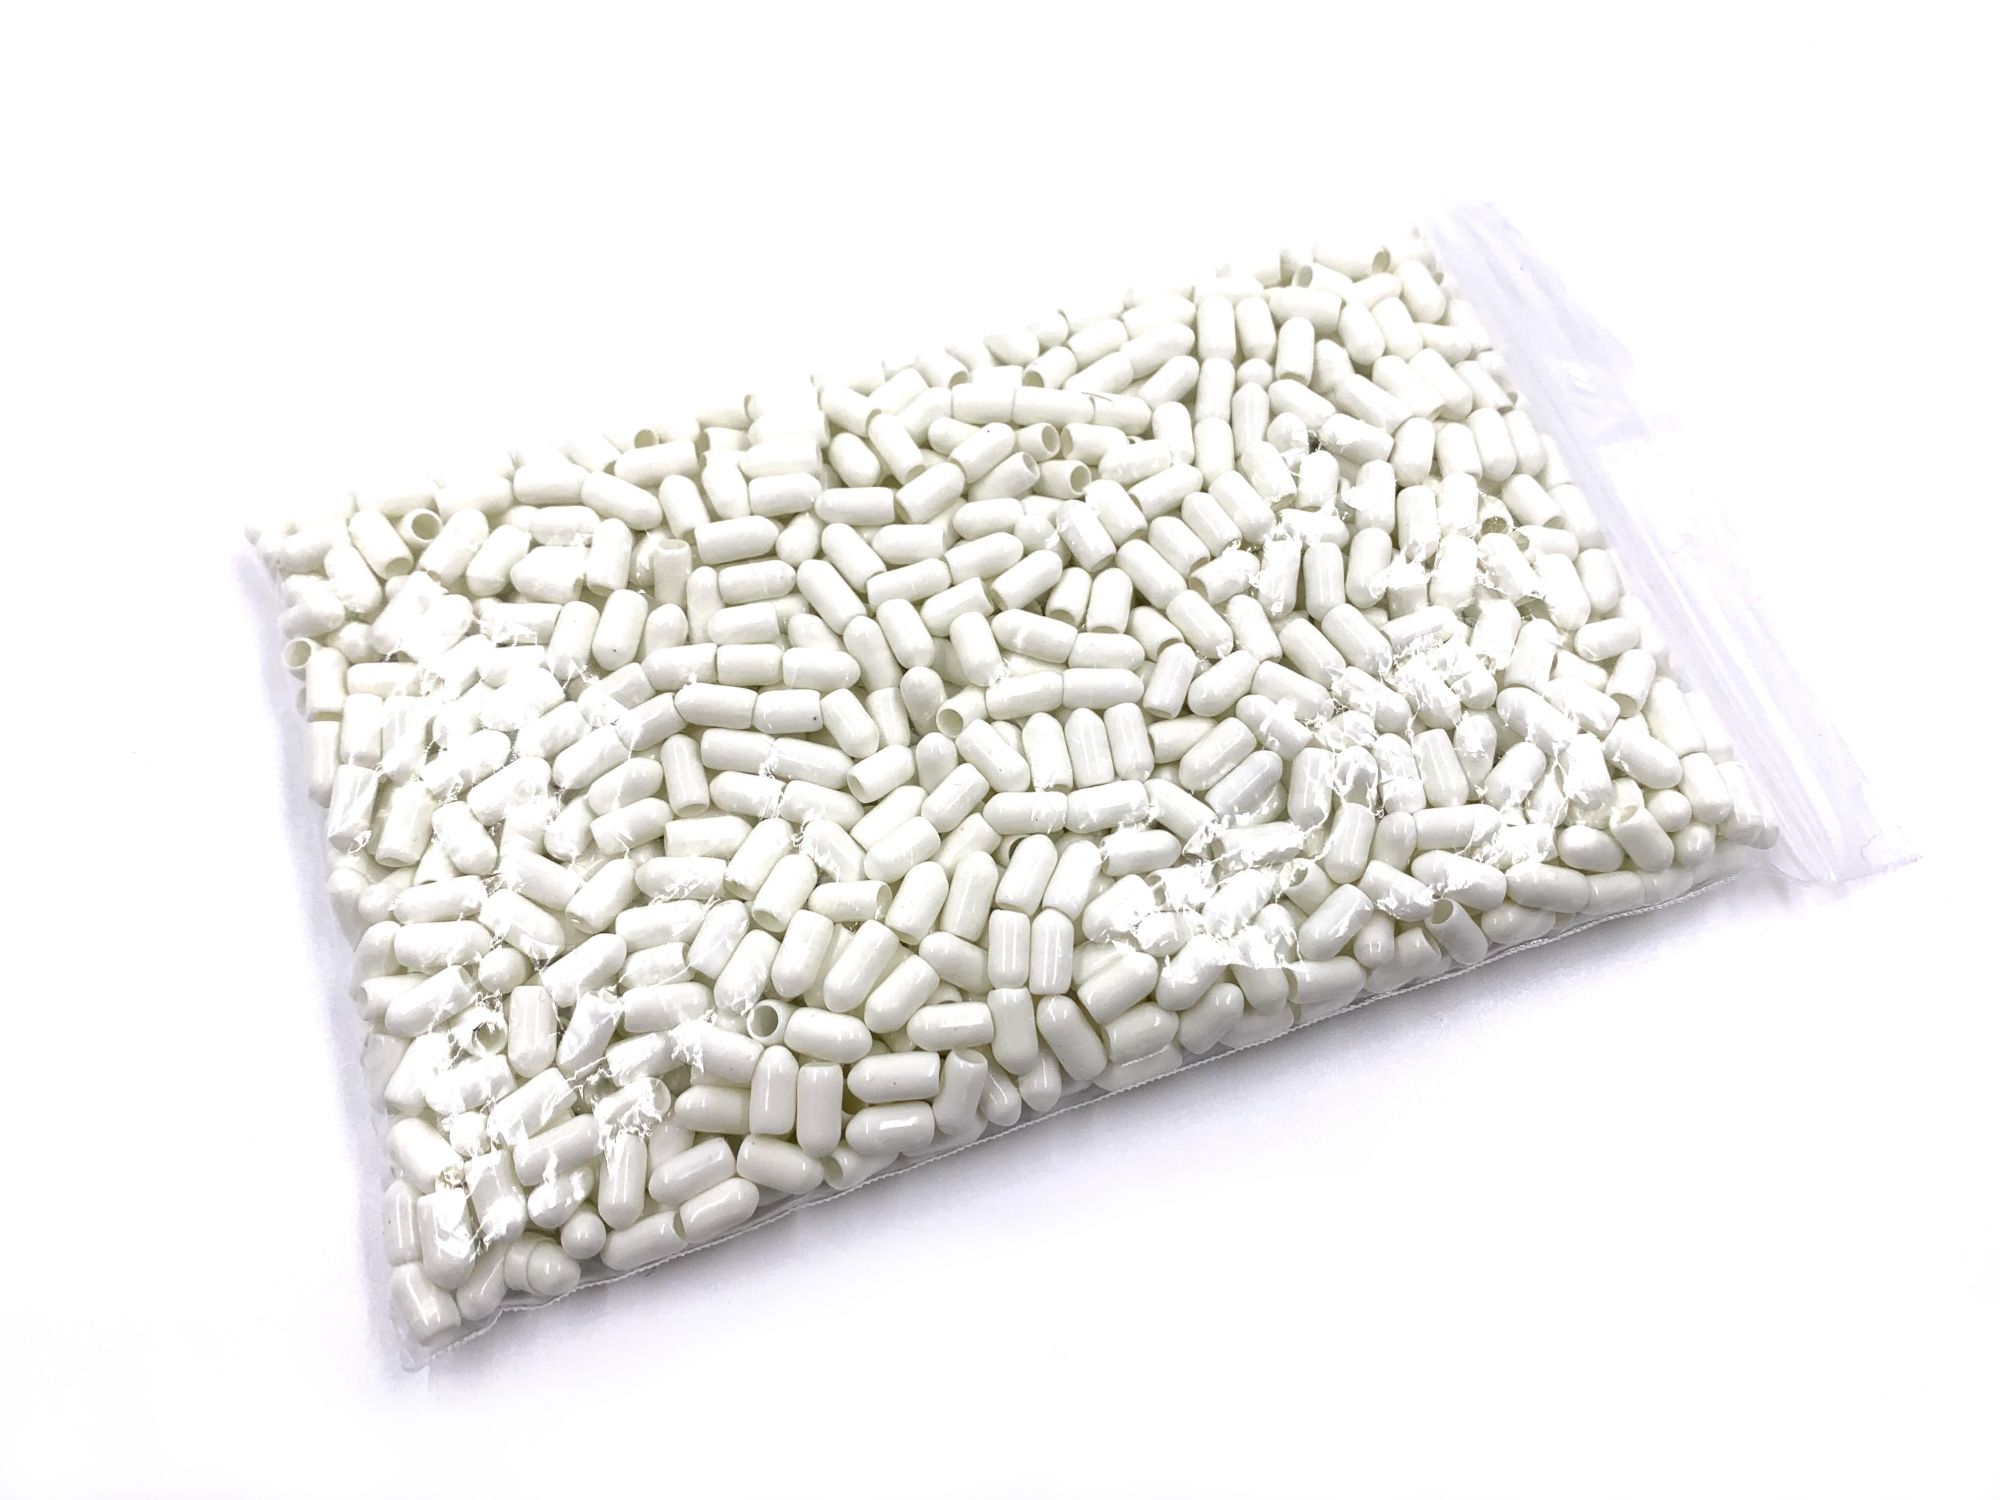 caps for syringes per bag of 1000 pieces